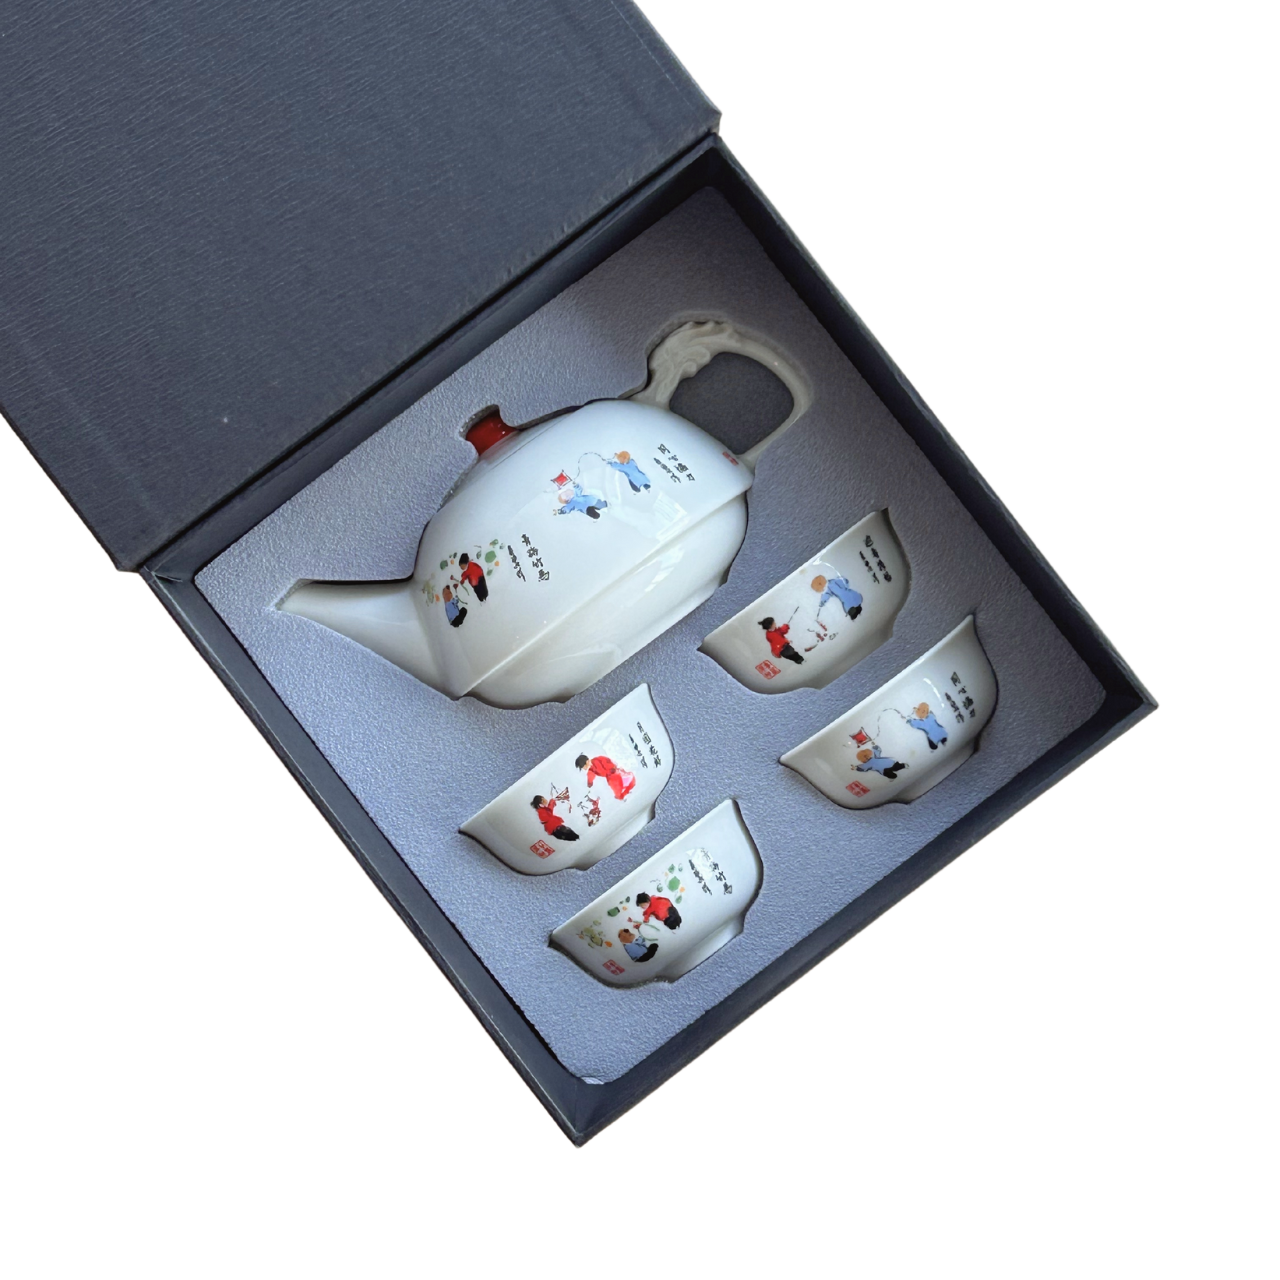 Oriental Tea Set in Gift Box - Set of 5 Limited Edition